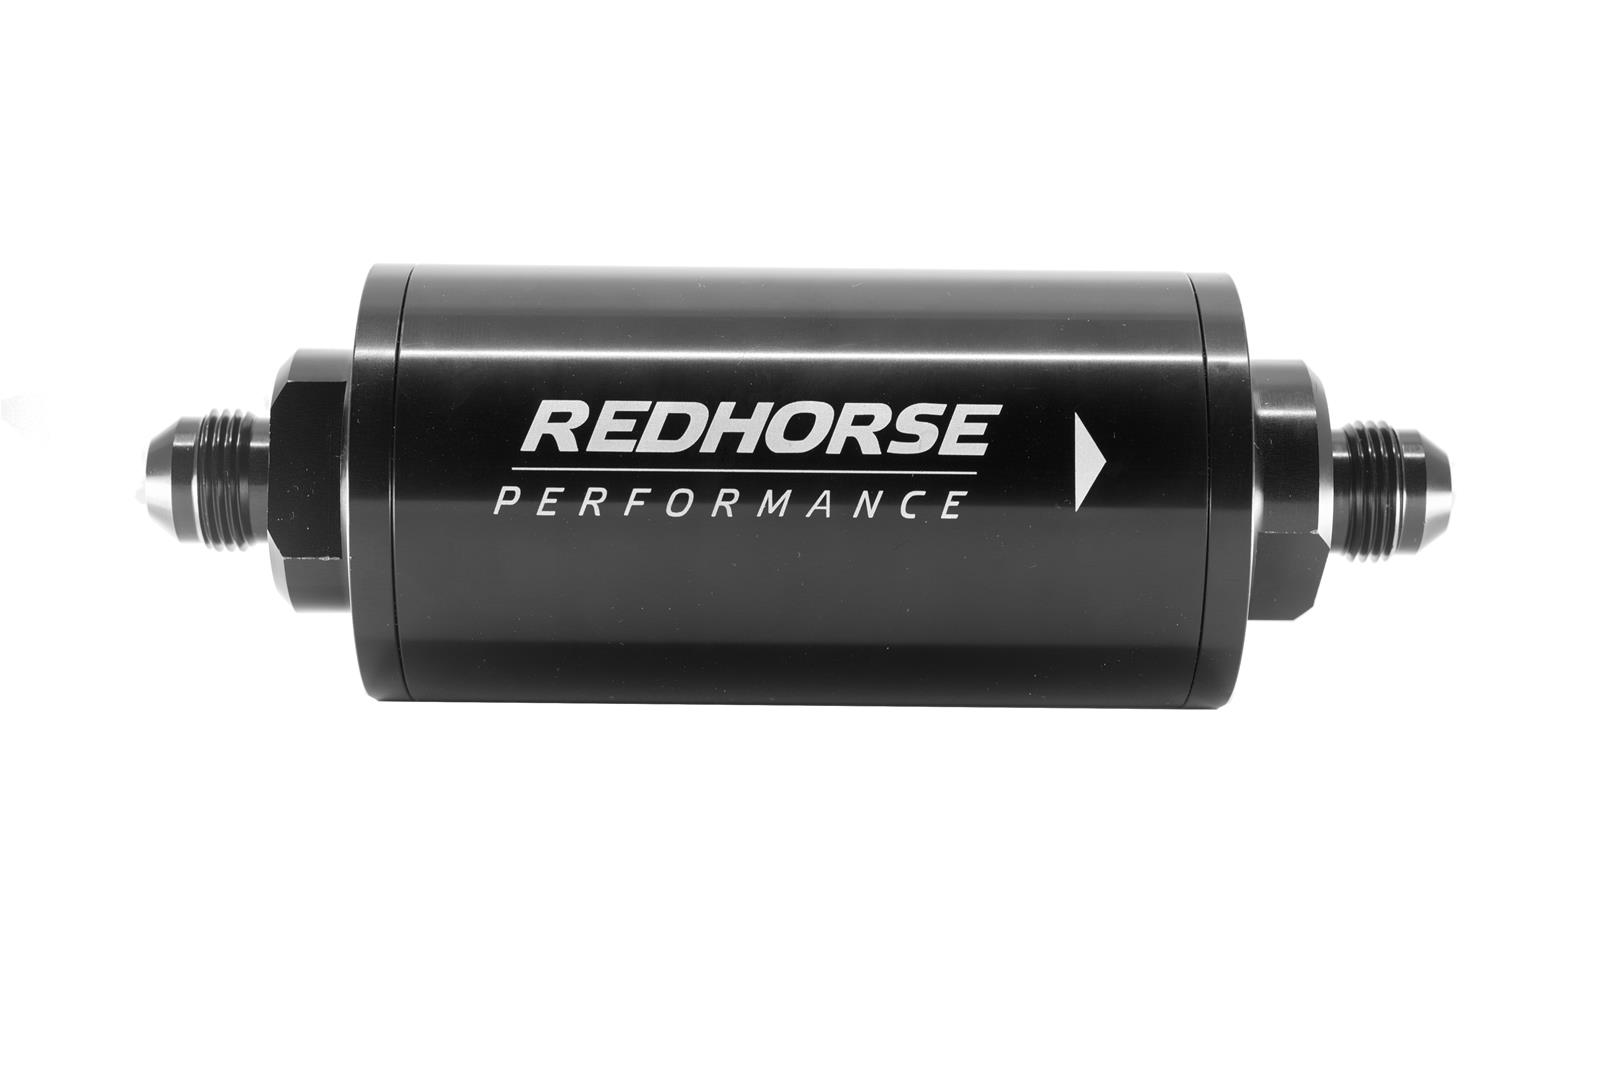 Redhorse Performance 4651-06-2-12 6in Cylindrical In-Line Race Fuel Filter w/ 12 Micron Fiberglass element - 06 AN